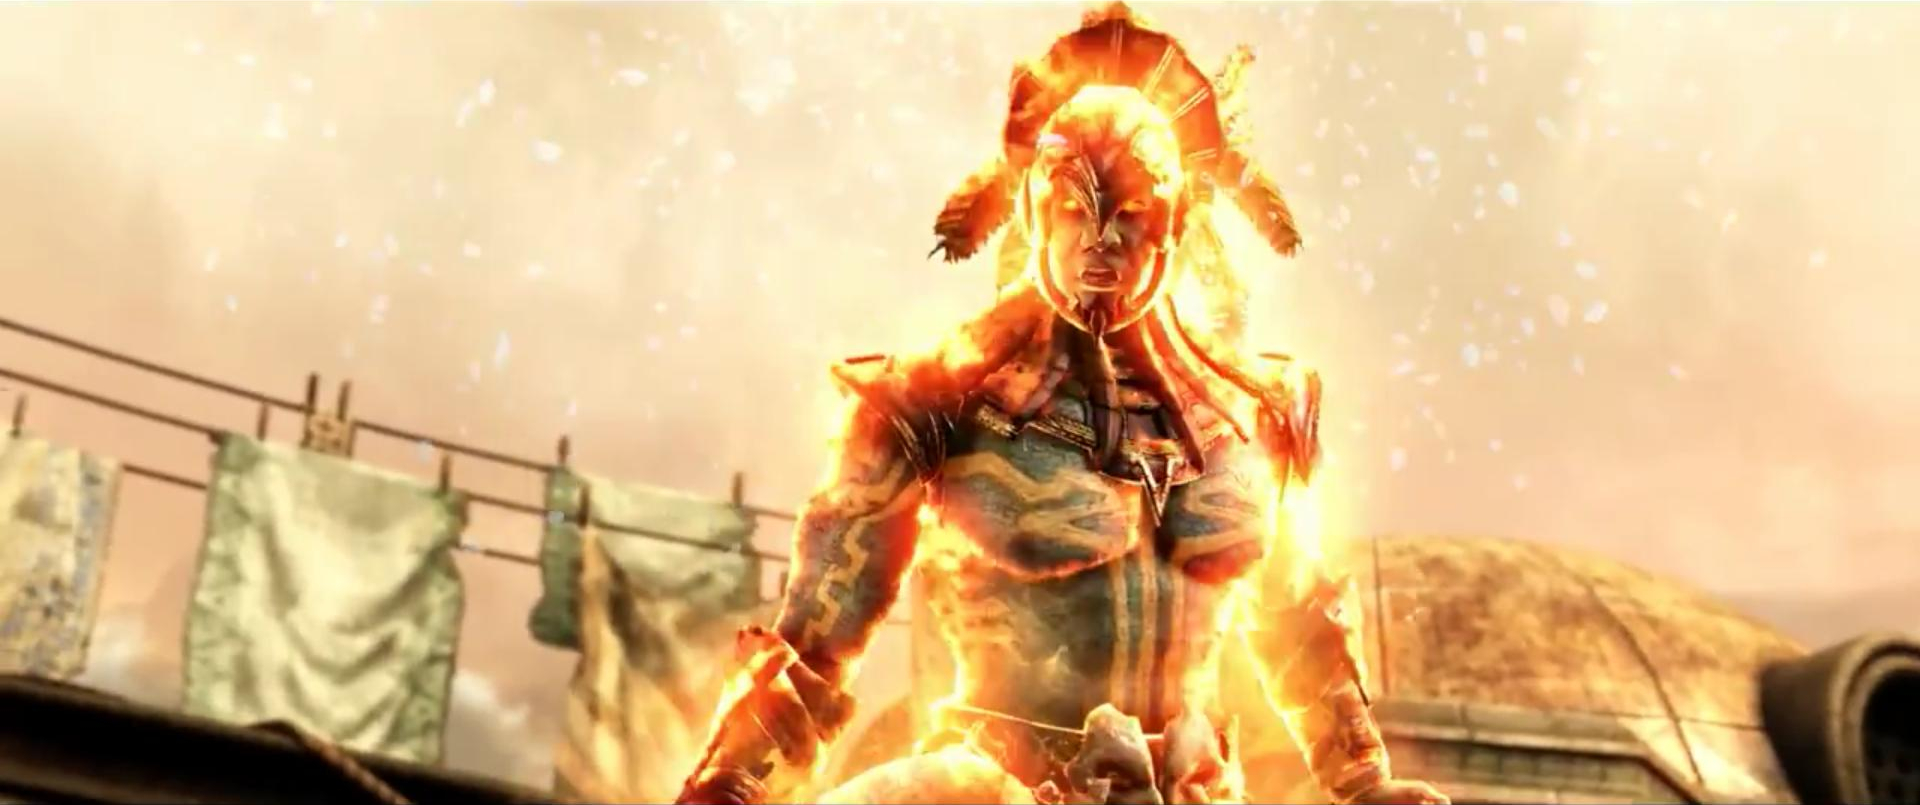 The Mortal Kombat X Launch Trailer is Here